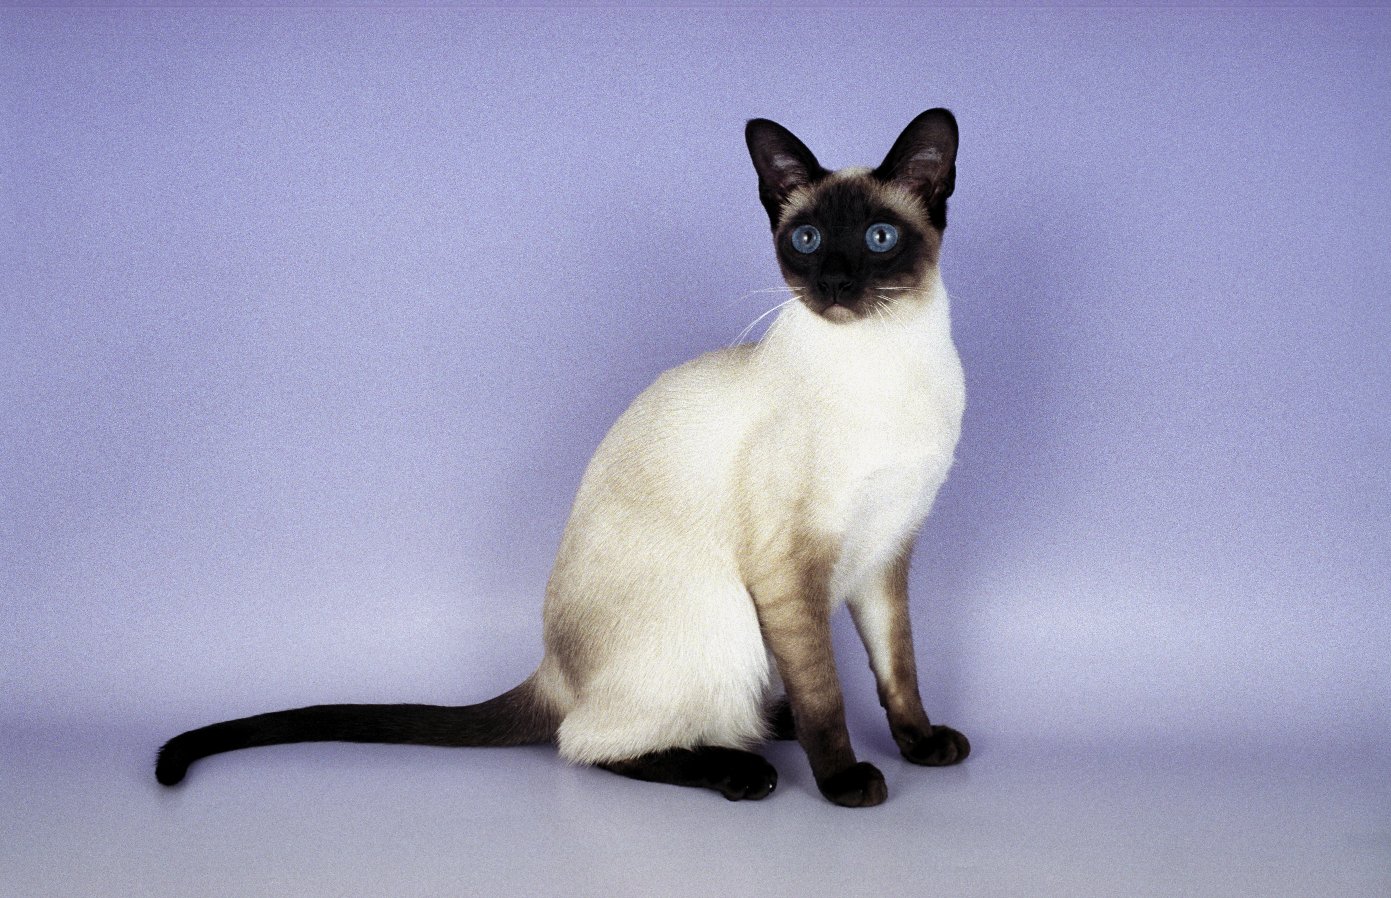 22 Questions & Answers From Chernobyl To Penicillin Trivia Quiz Siamese cat